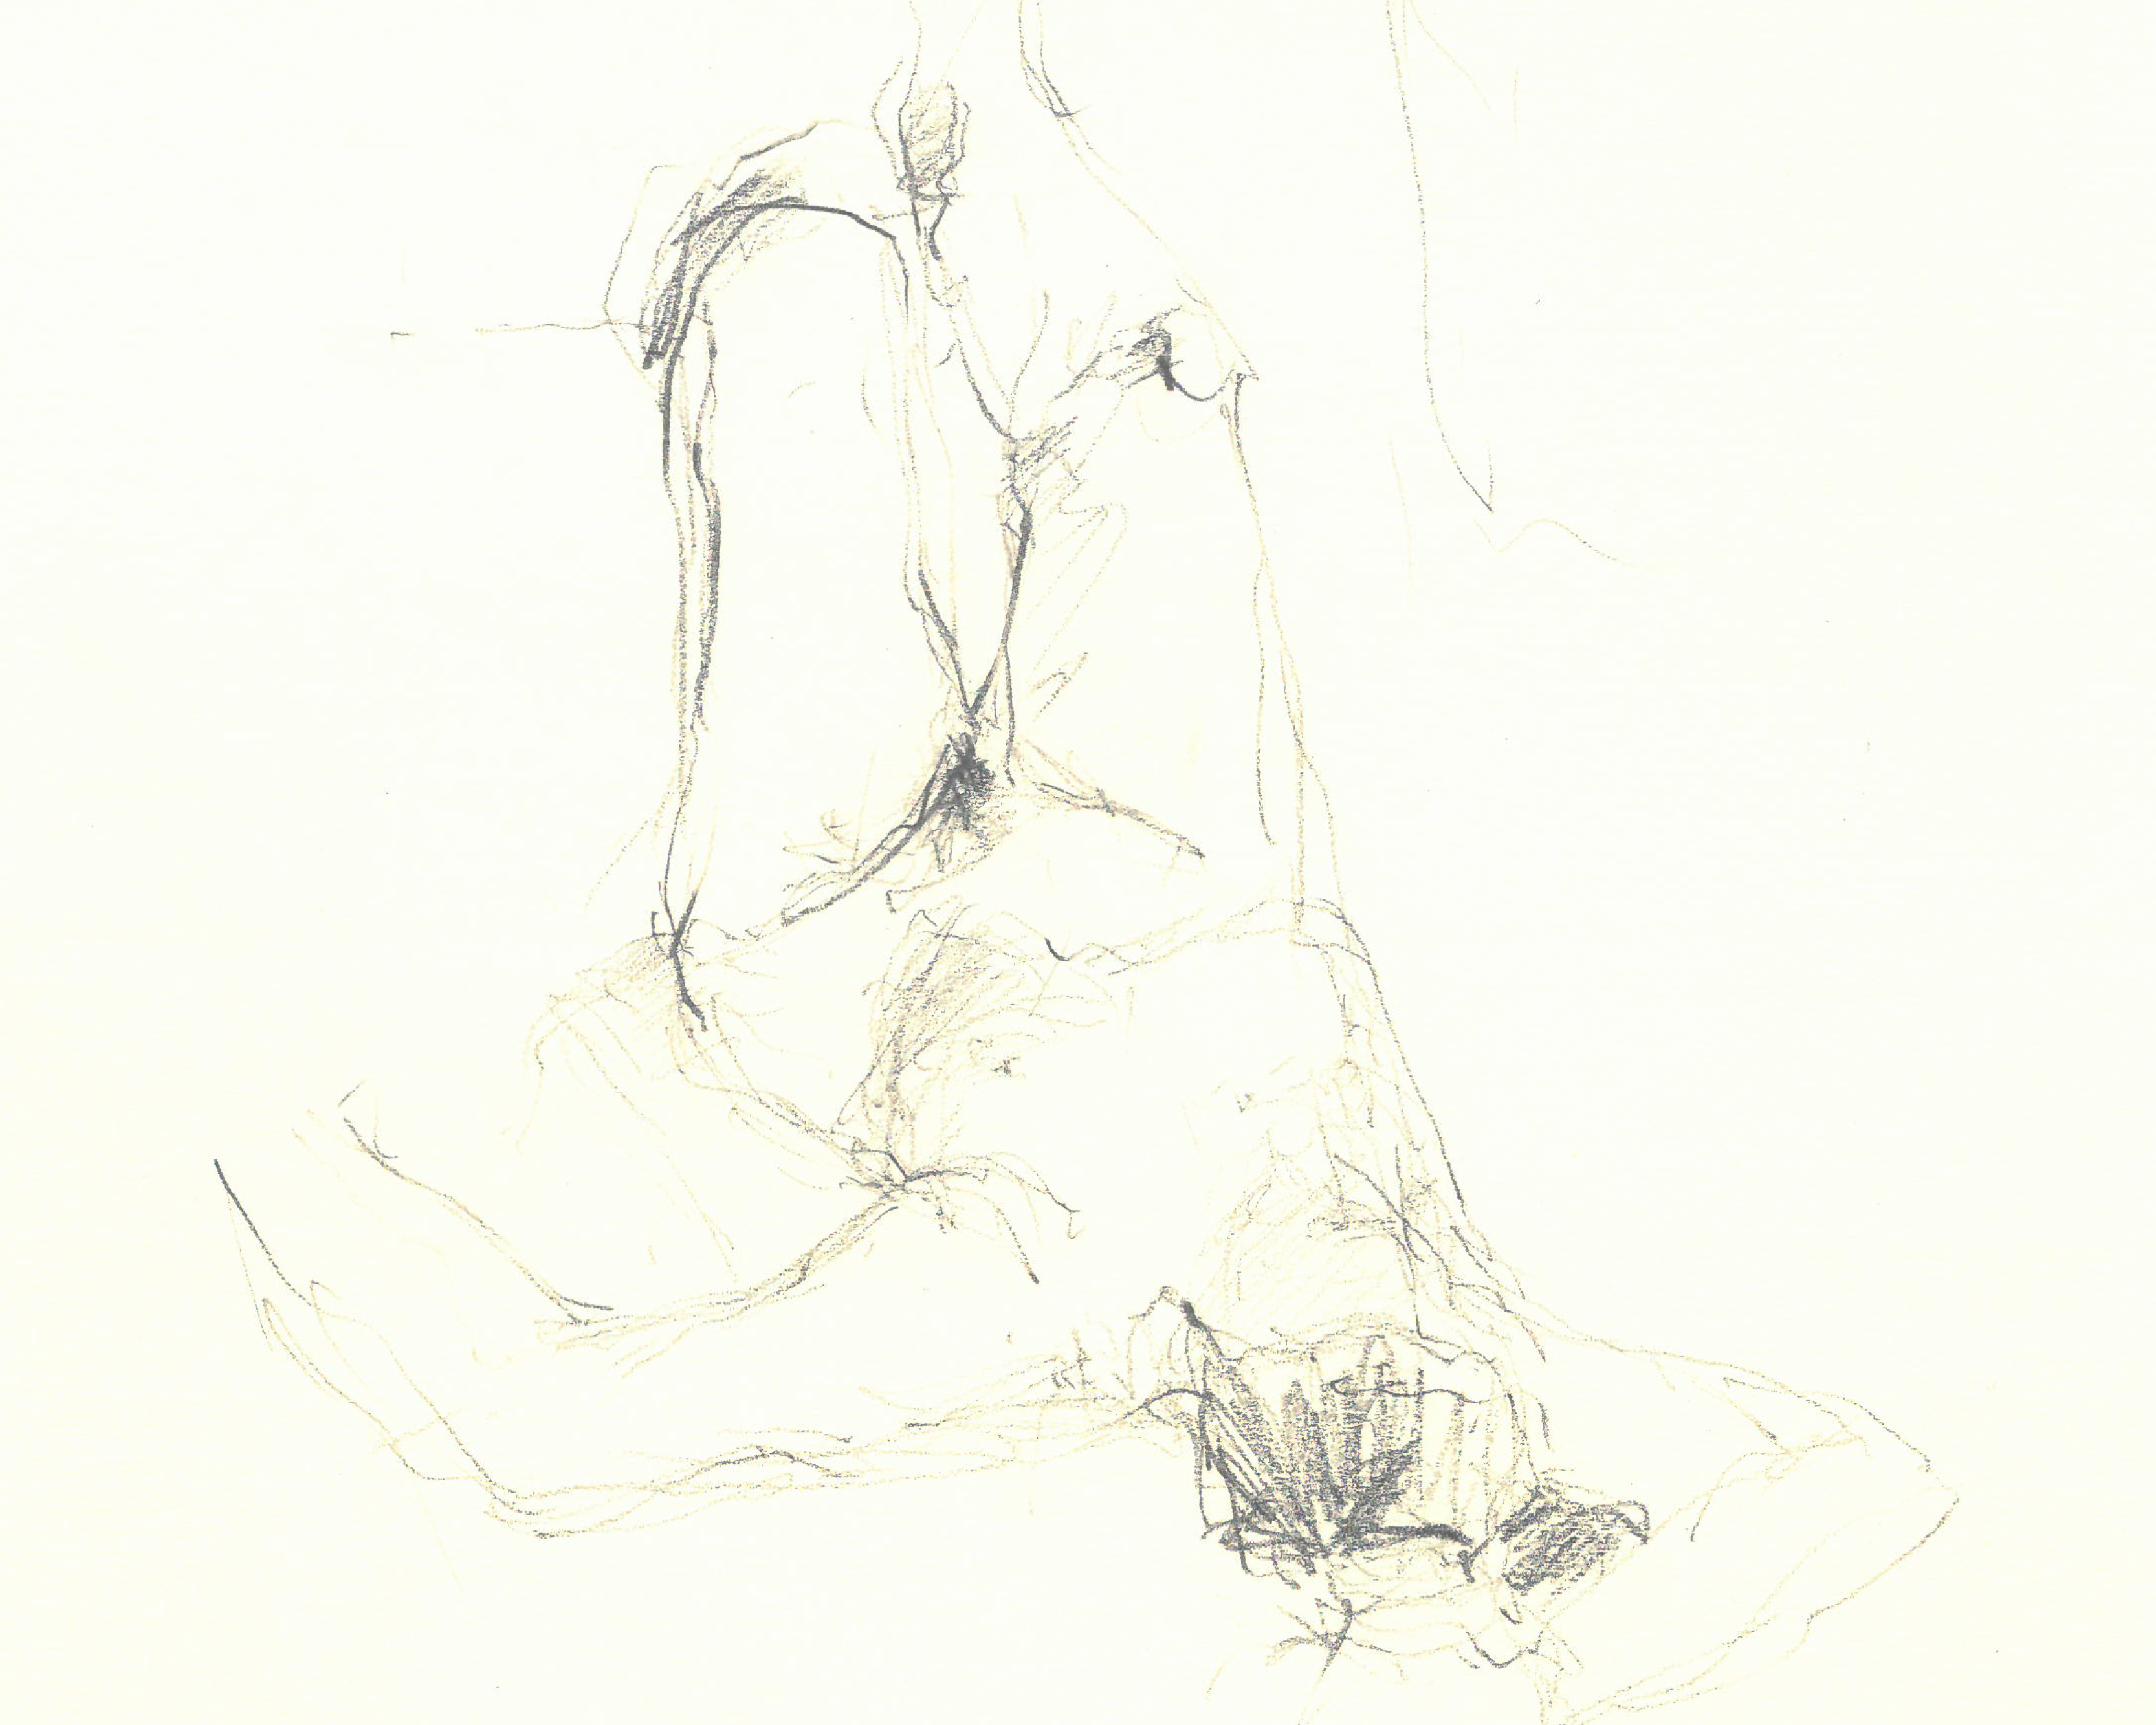 An image of a pencil drawing of a life model laying on their back with their feet up.